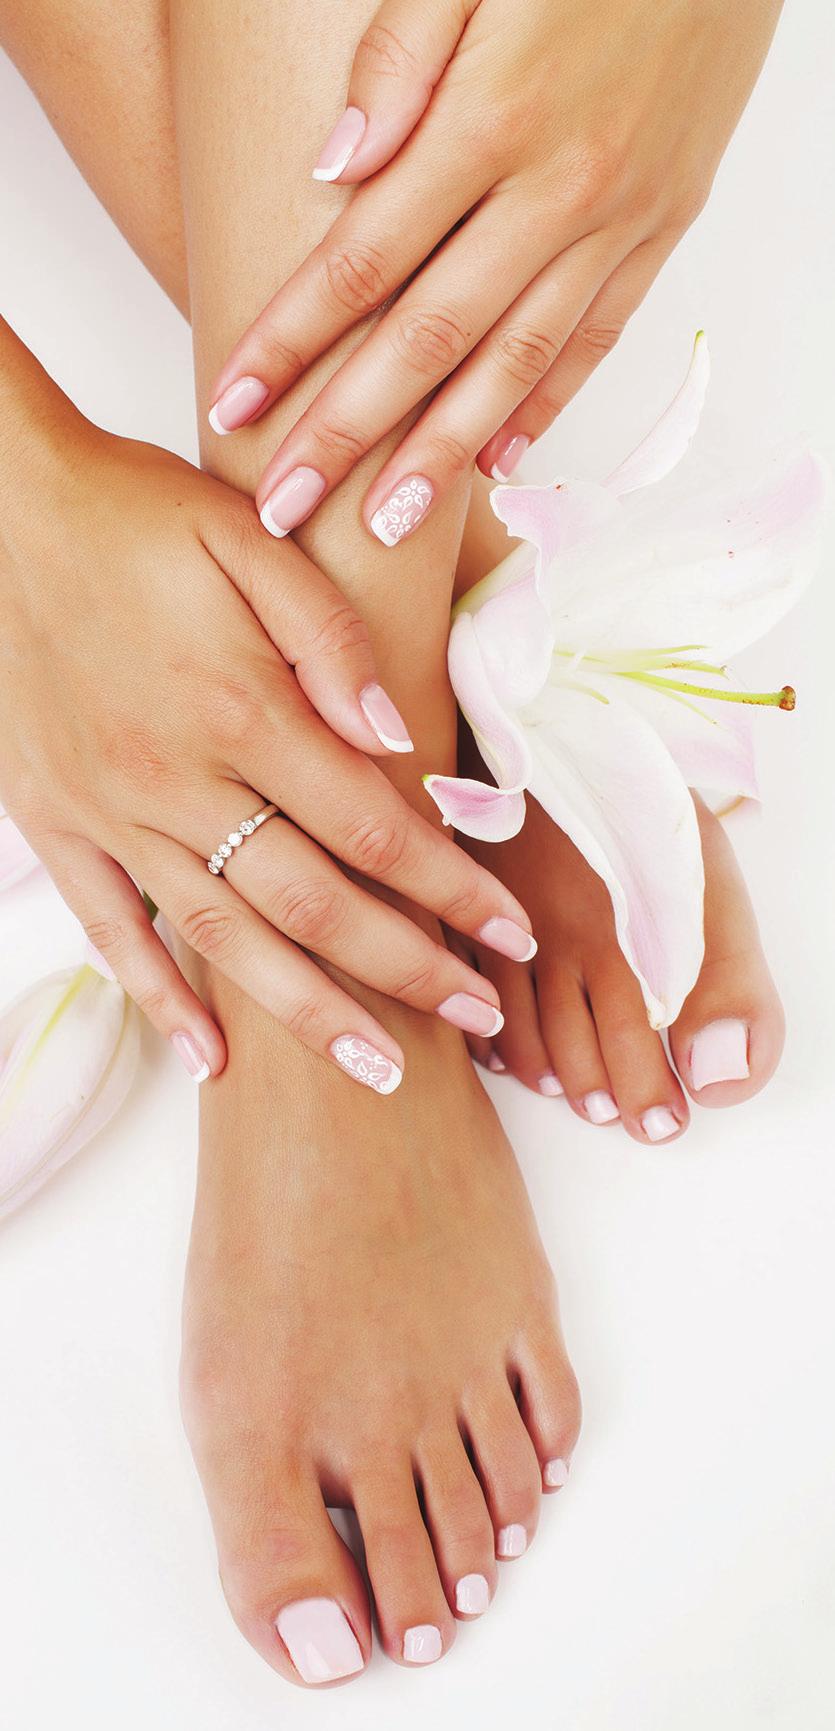 Manicures File and Shape (15 mins) $15 Nail file, trim and buff. File and Polish Manicure (20 mins) $30 File and shape with traditional polish application.